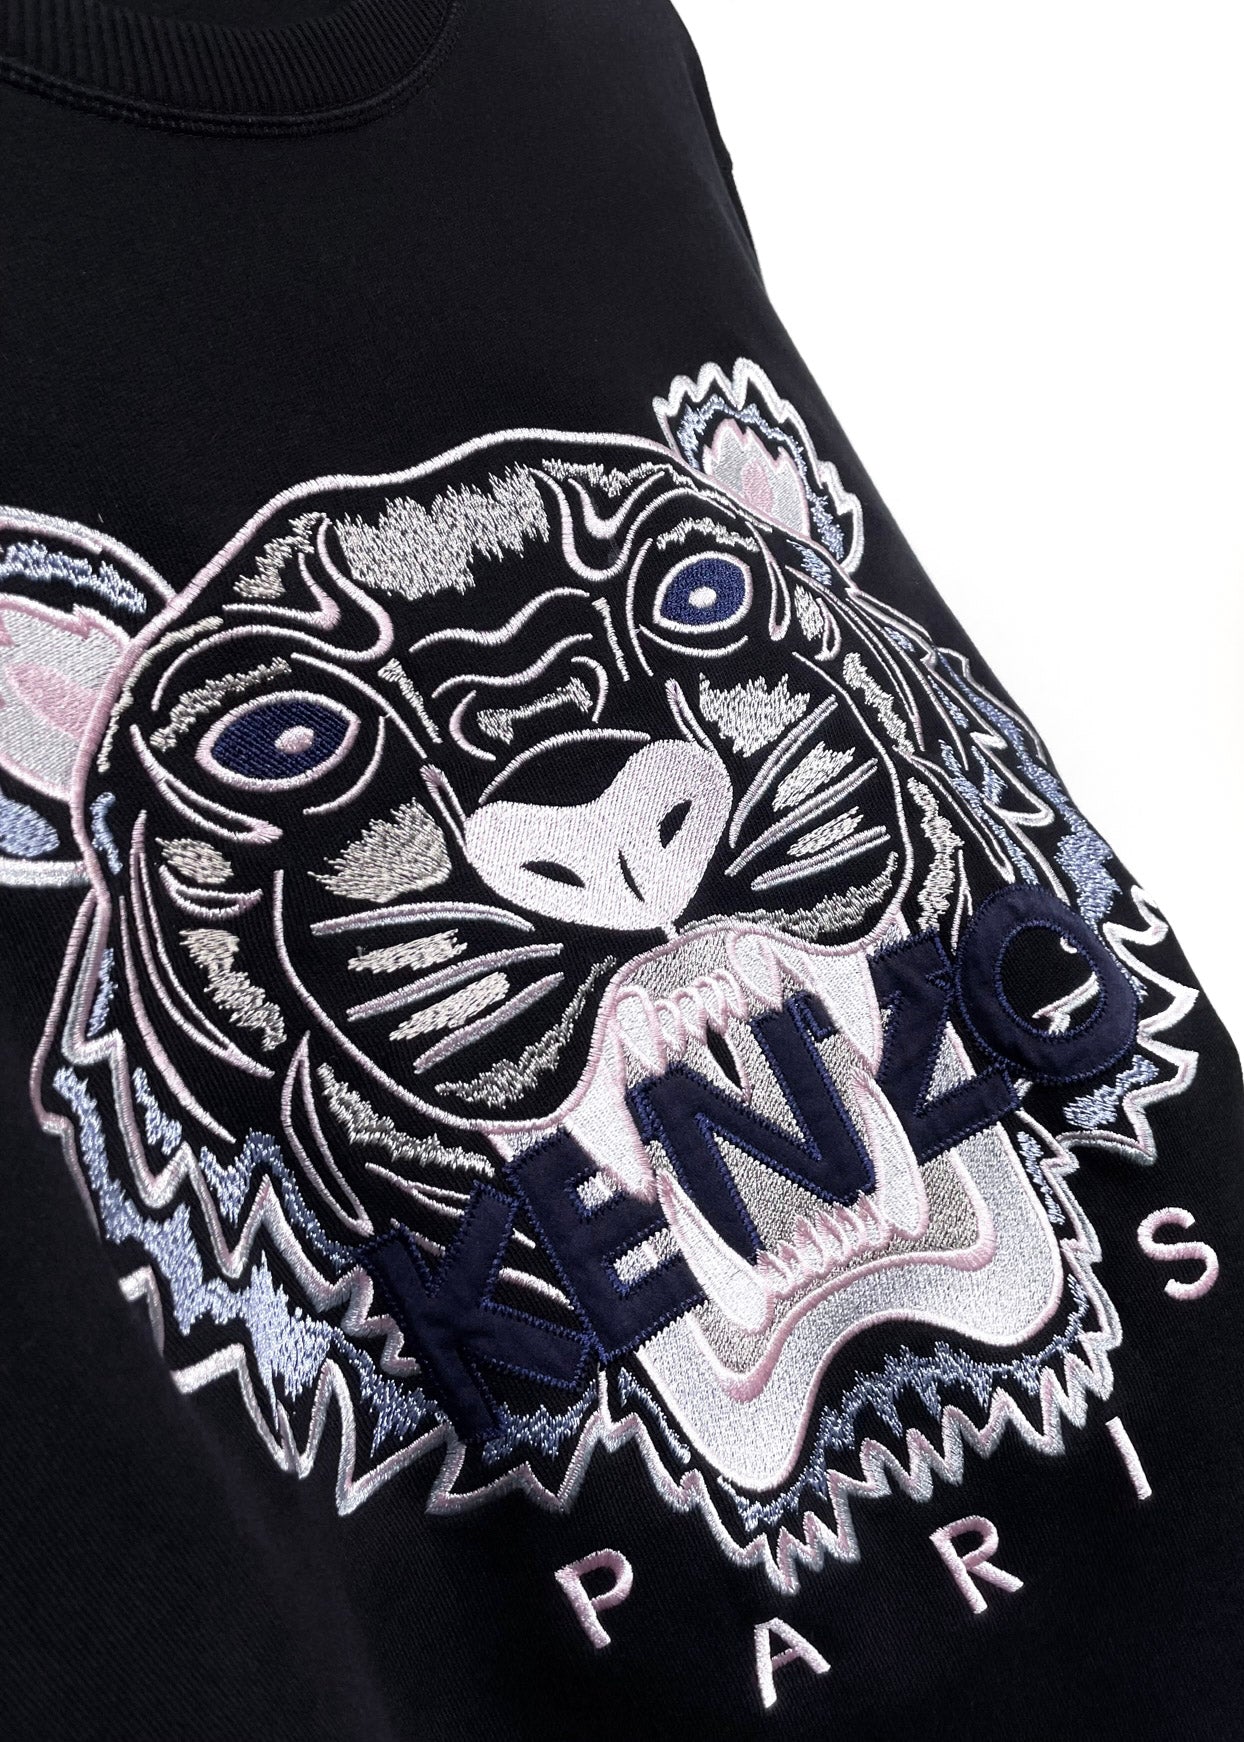 Kenzo Pink Tiger Embroidered Black Sweatshirt – Boutique LUC.S